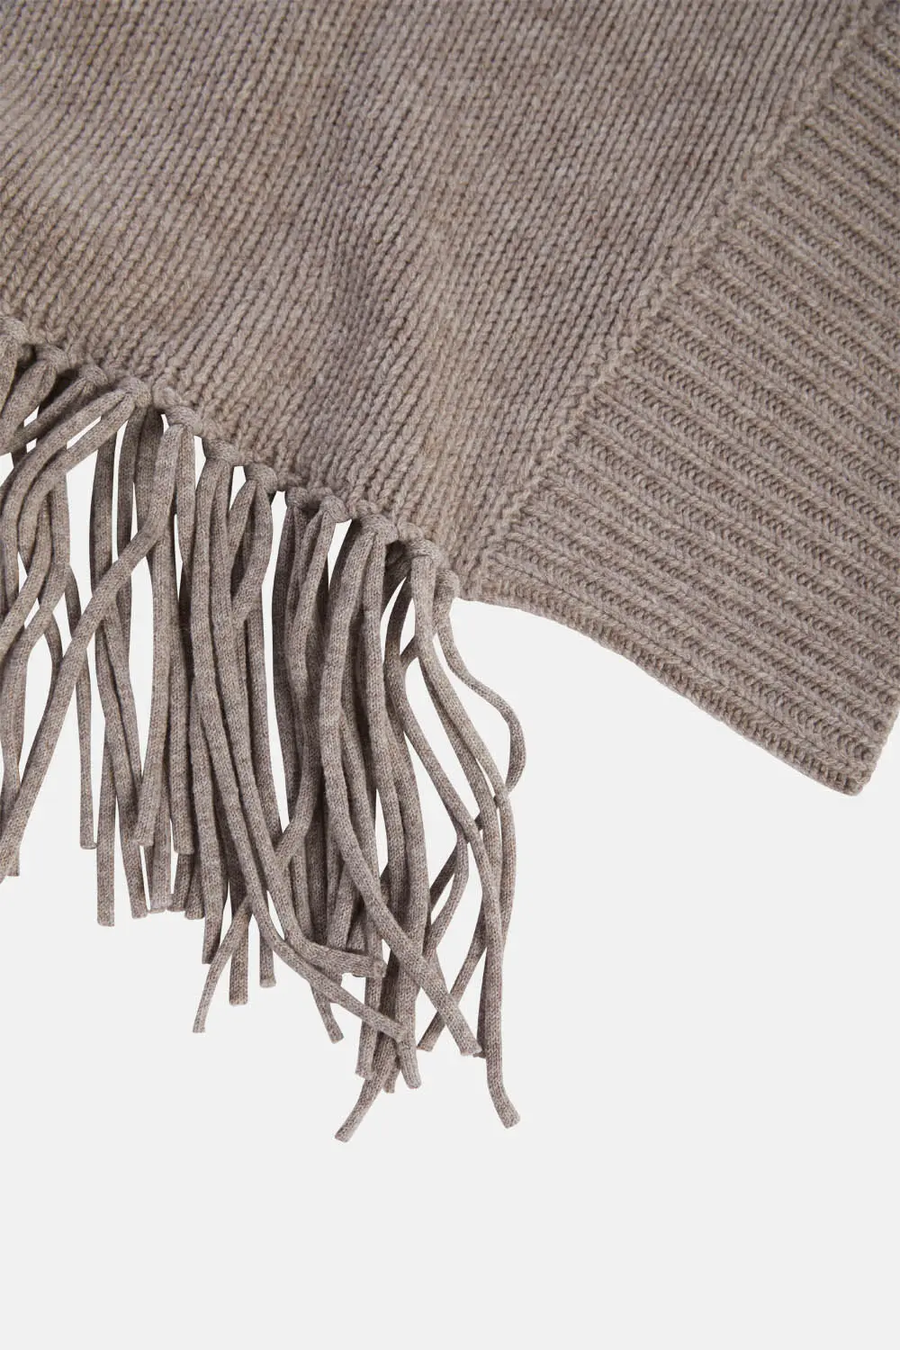 SKILLS & GENES - VIRGIN WOOL PONCHO WITH FRINGES INTENSE SAND